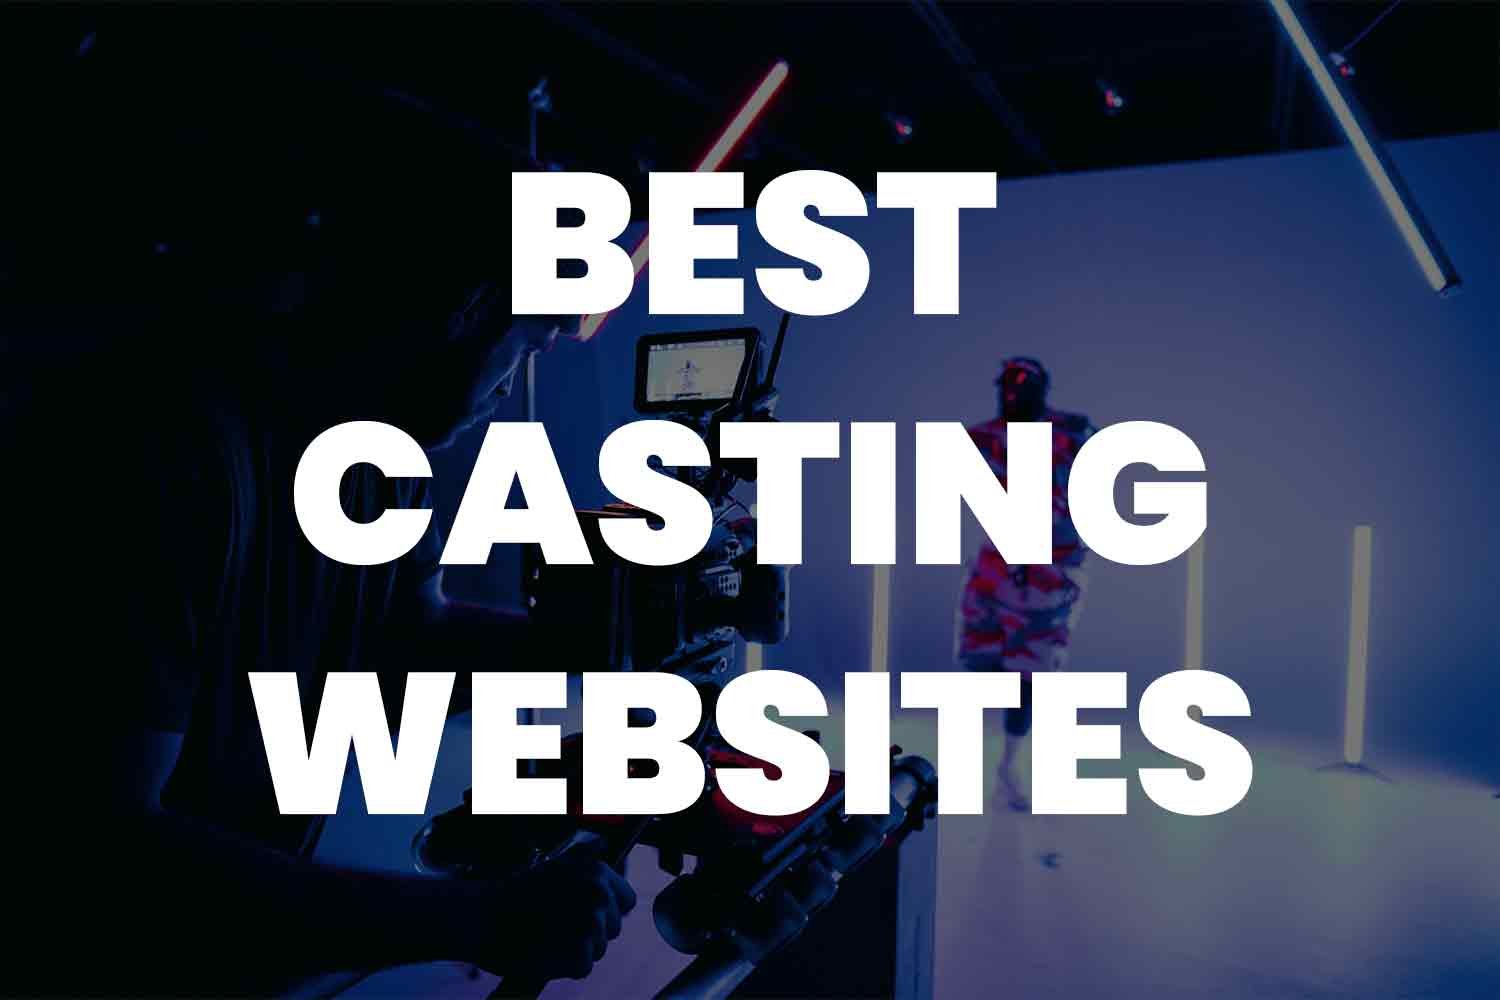 The Ultimate Photo Guide for Your Online Profile - Central Casting